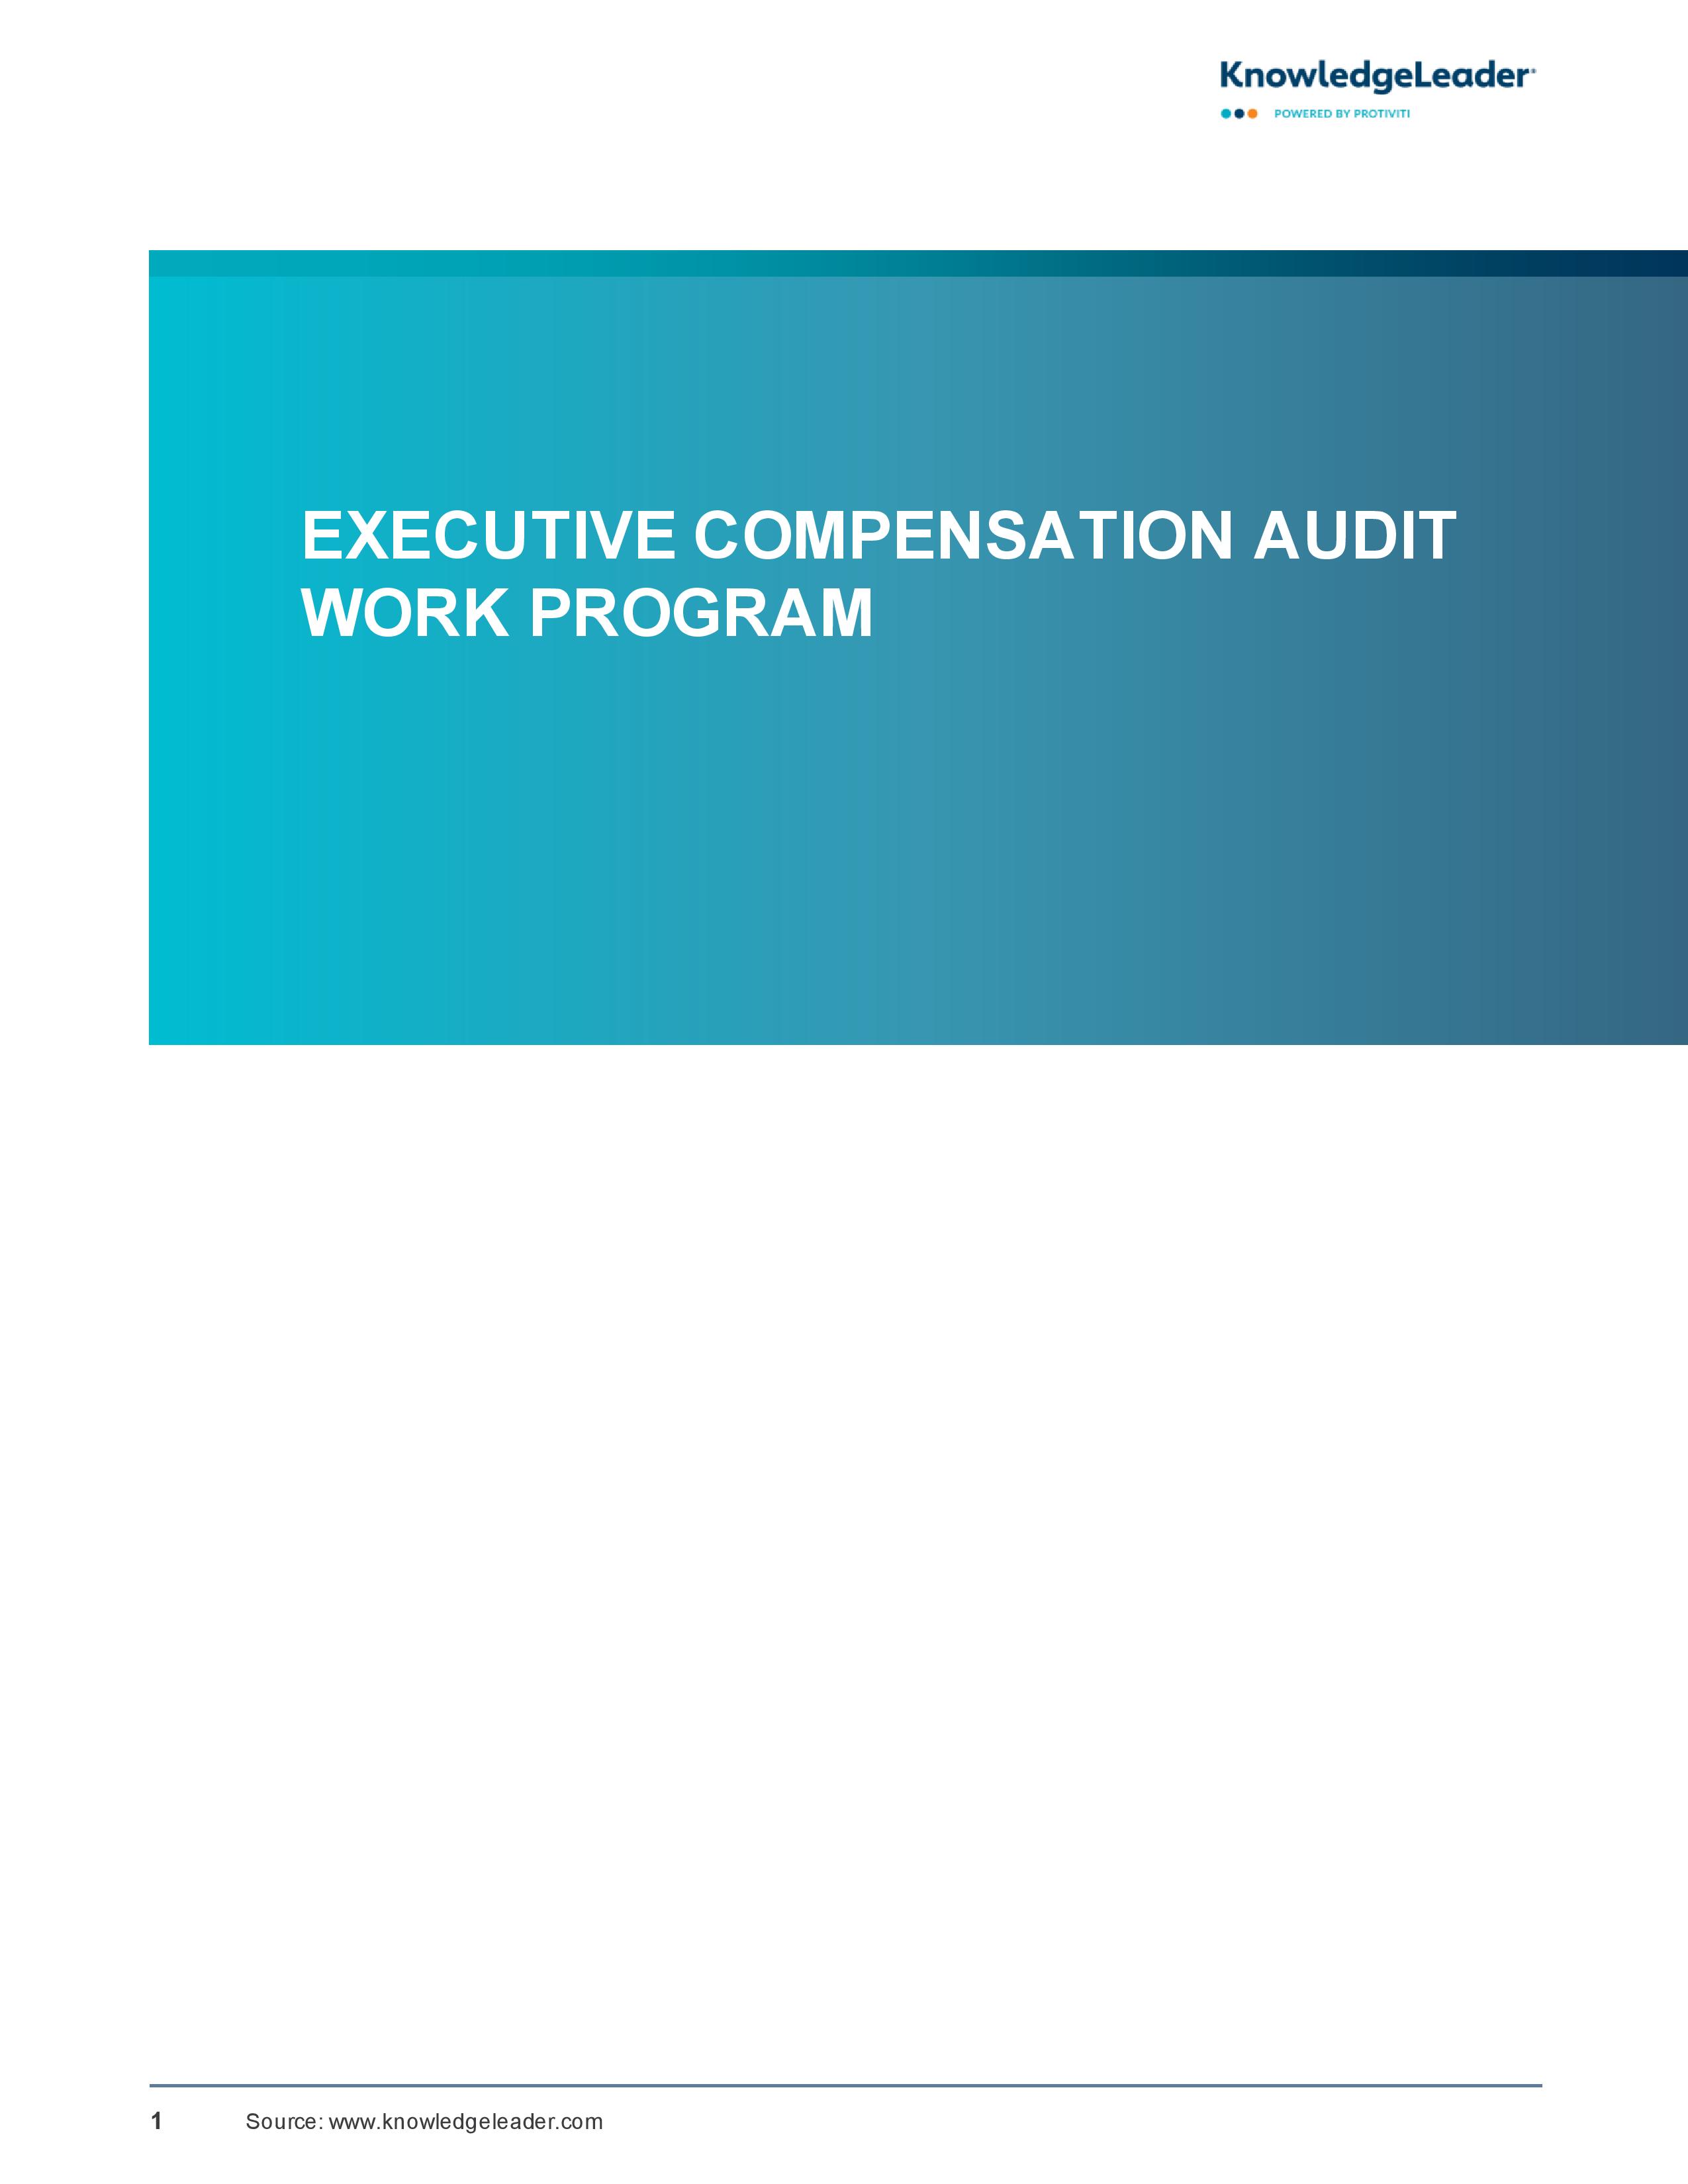 Screenshot of the first page of Executive Compensation Audit Work Program